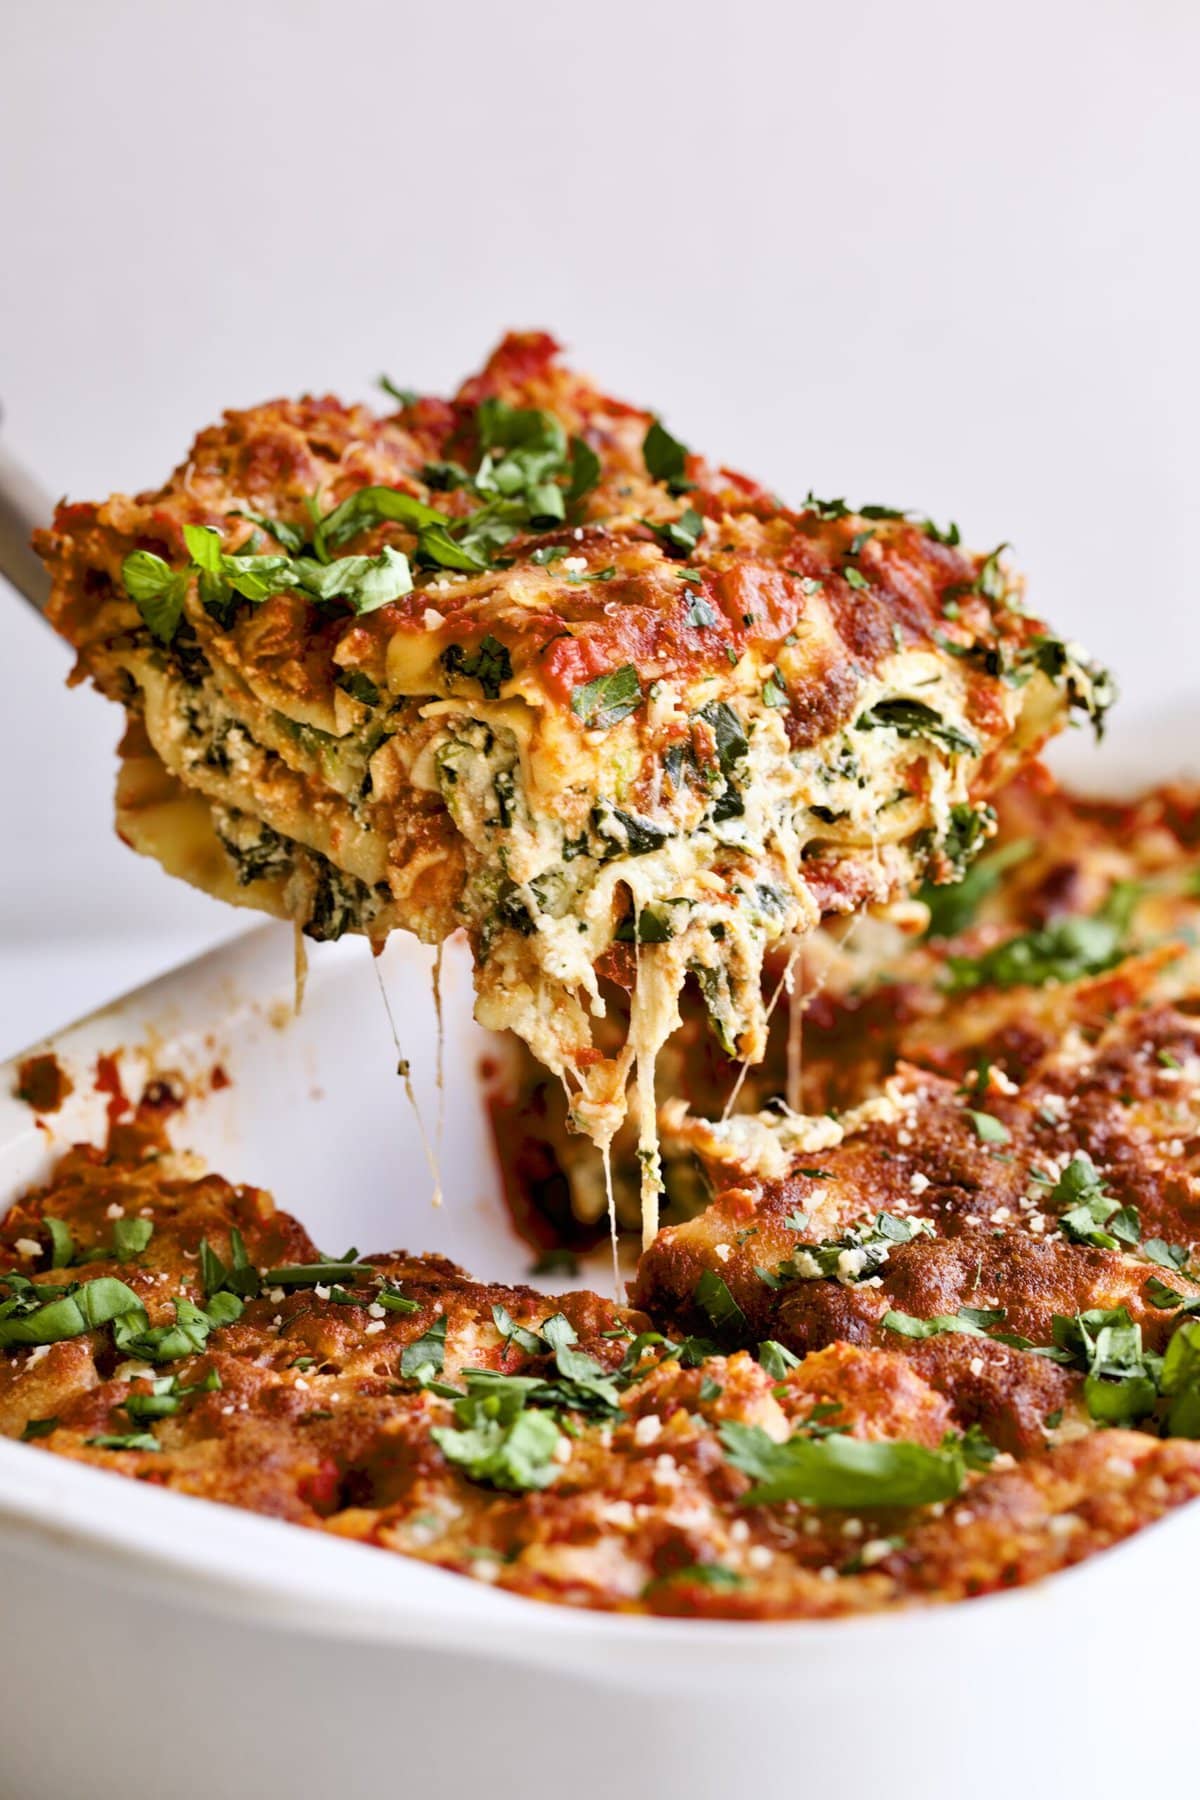 Authentic Spinach Lasagna with Ricotta